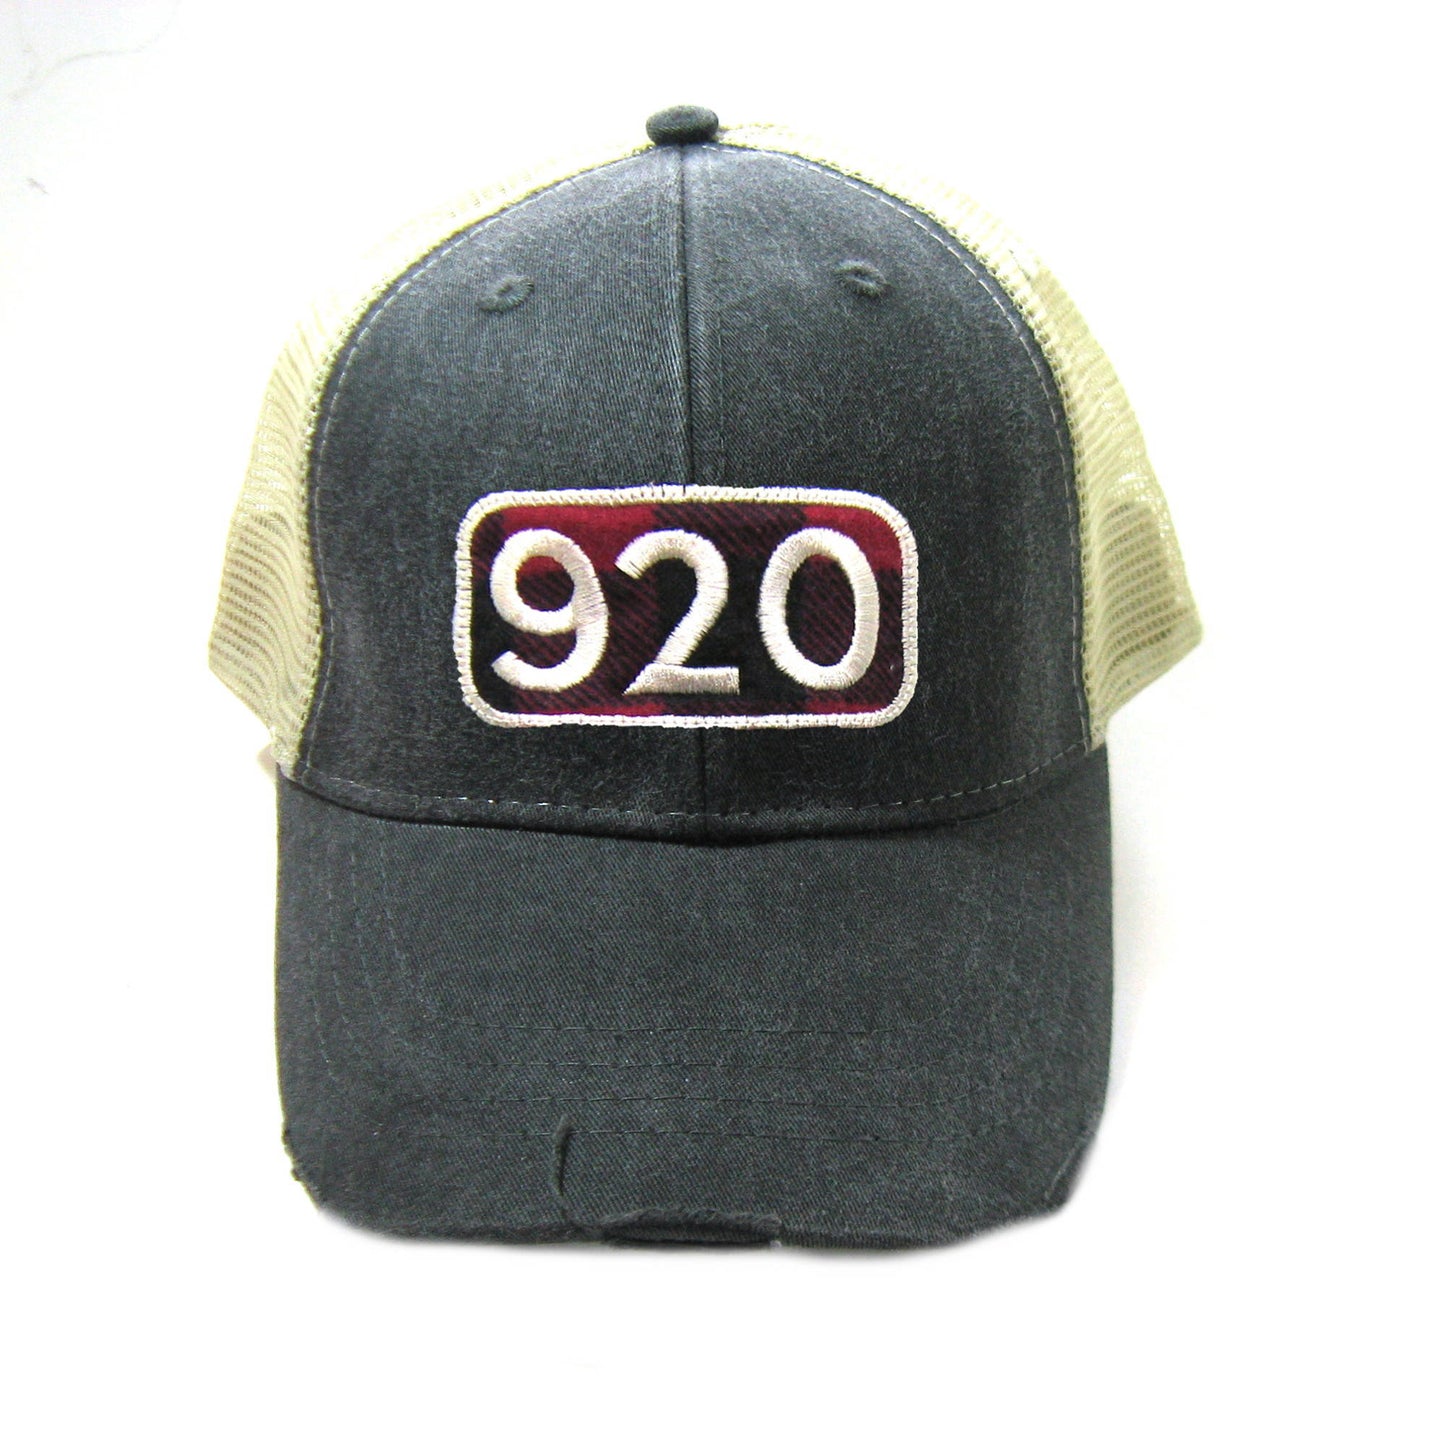 Area Code Hat - Black Distressed Snapback Trucker Hat - Buffalo Check Patch